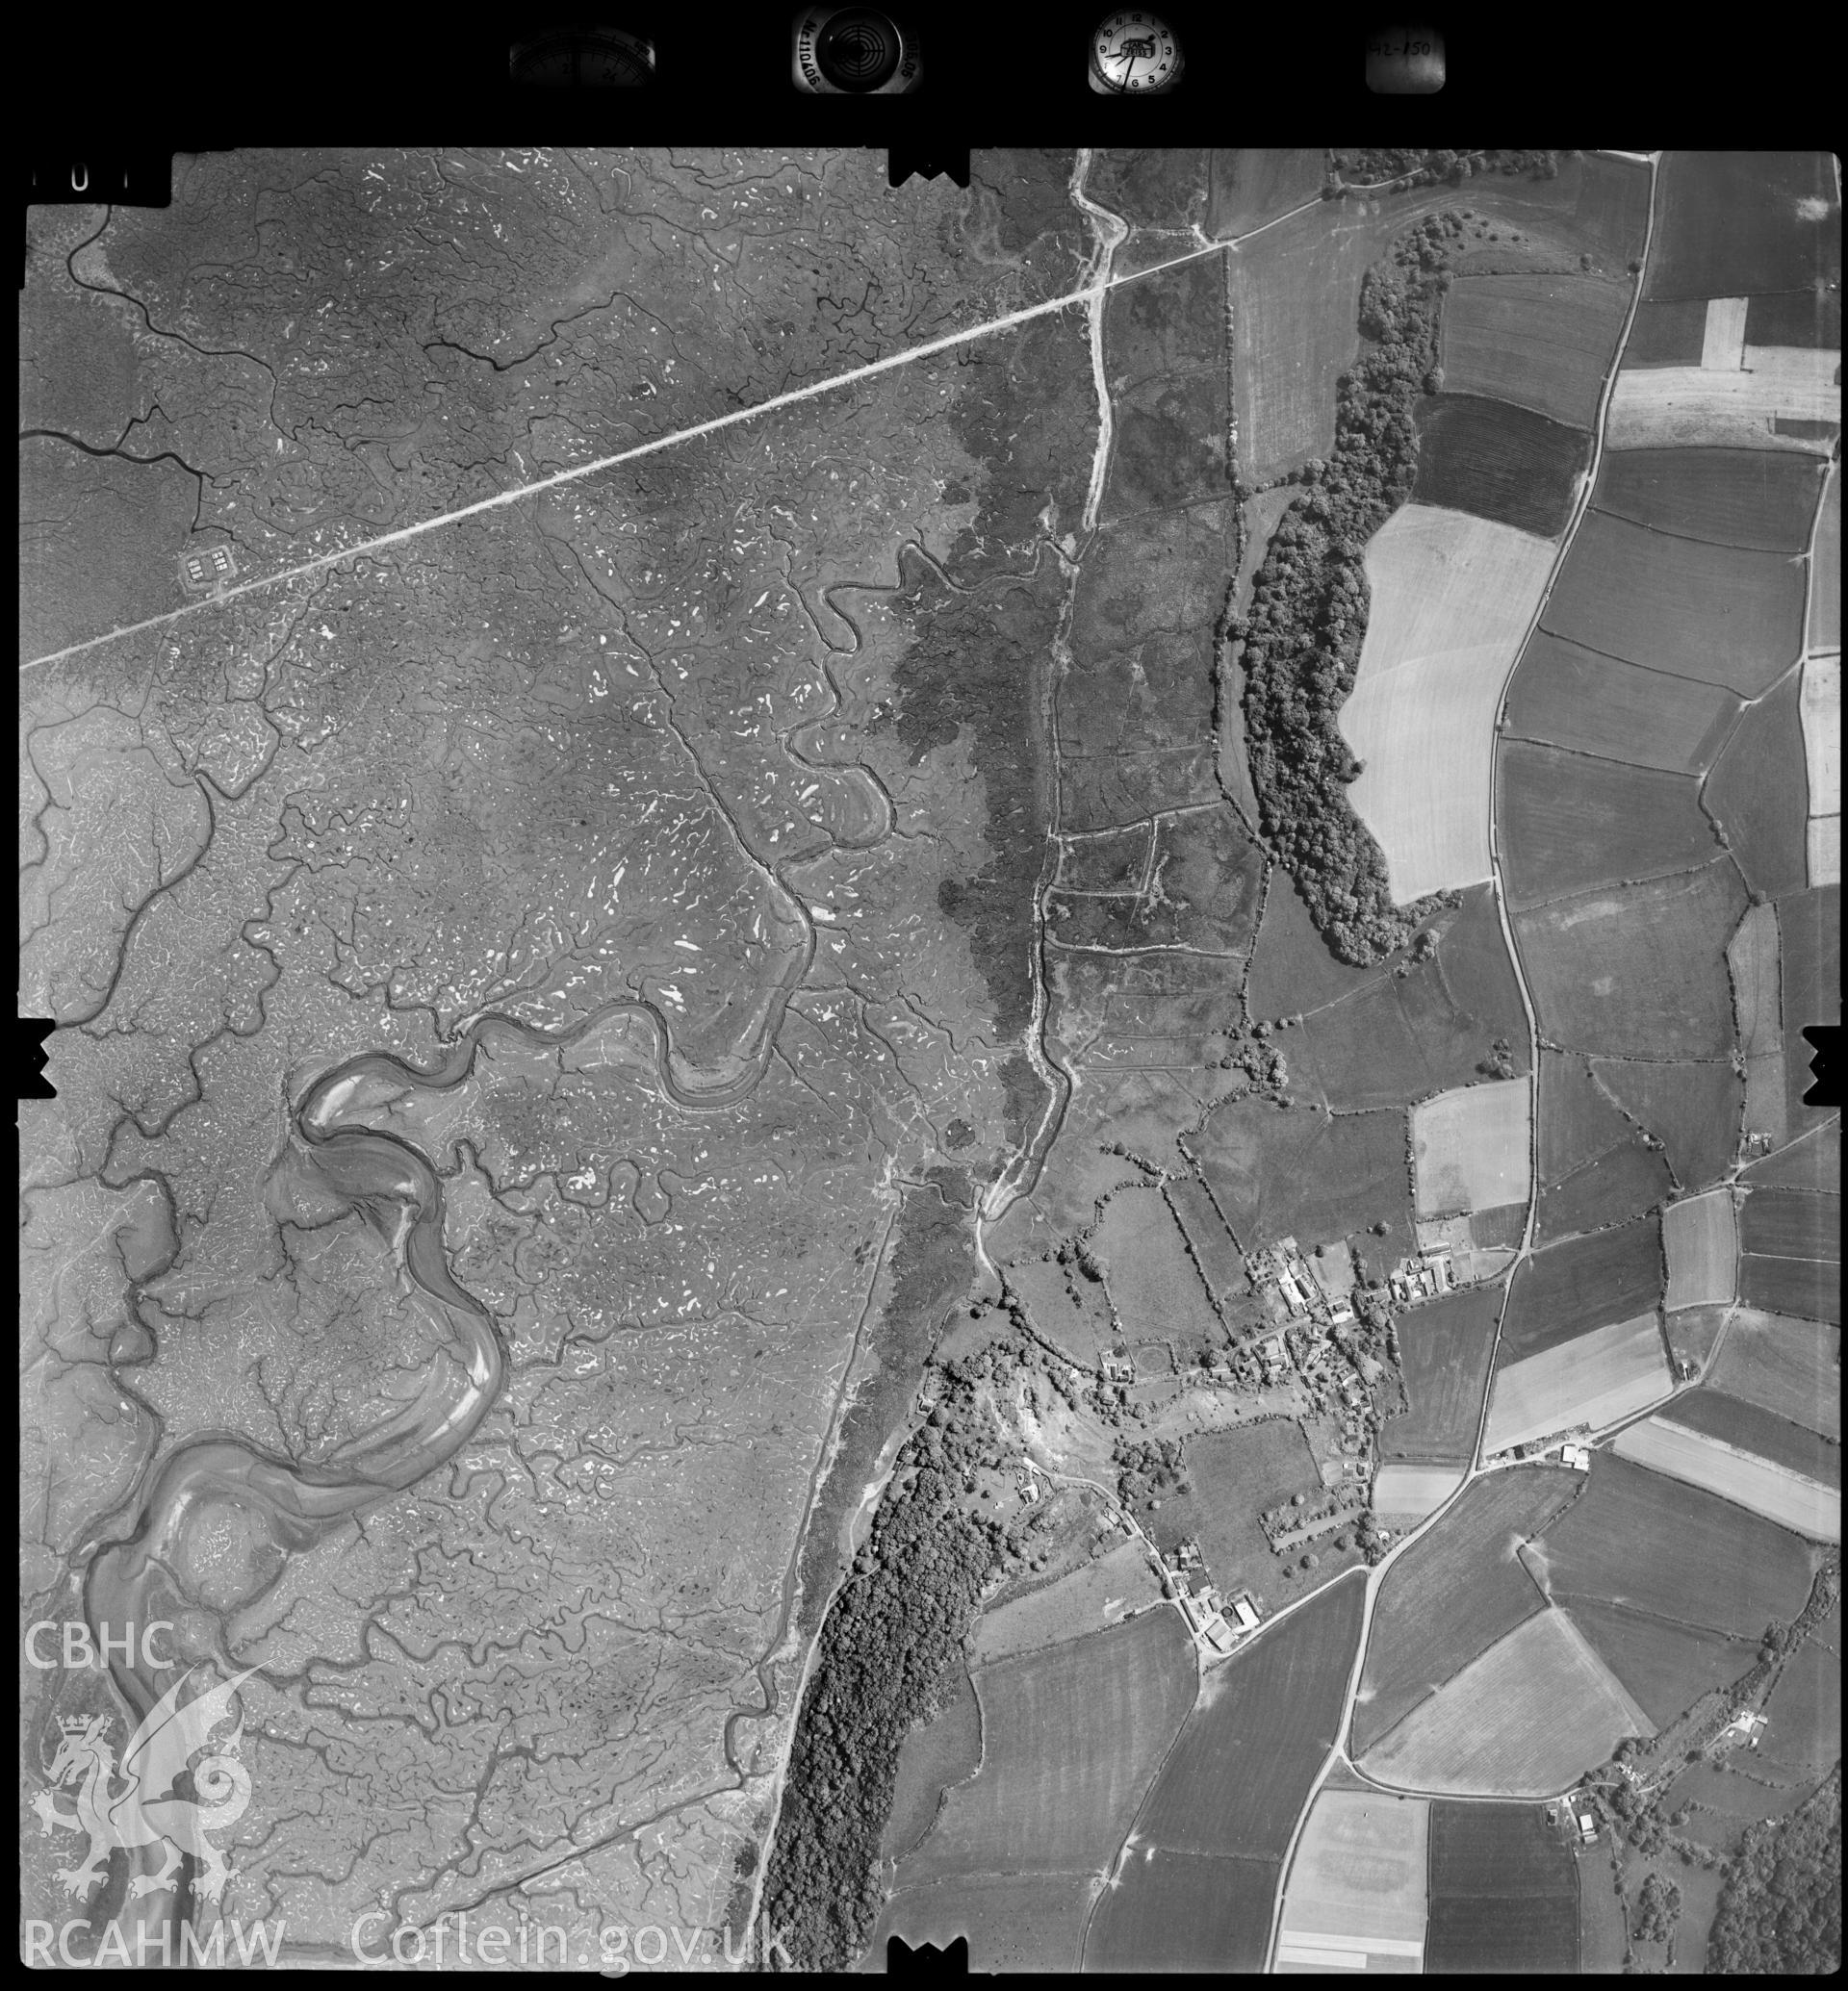 Digitized copy of an aerial photograph showing the Landimore area, taken by Ordnance Survey, 1992.